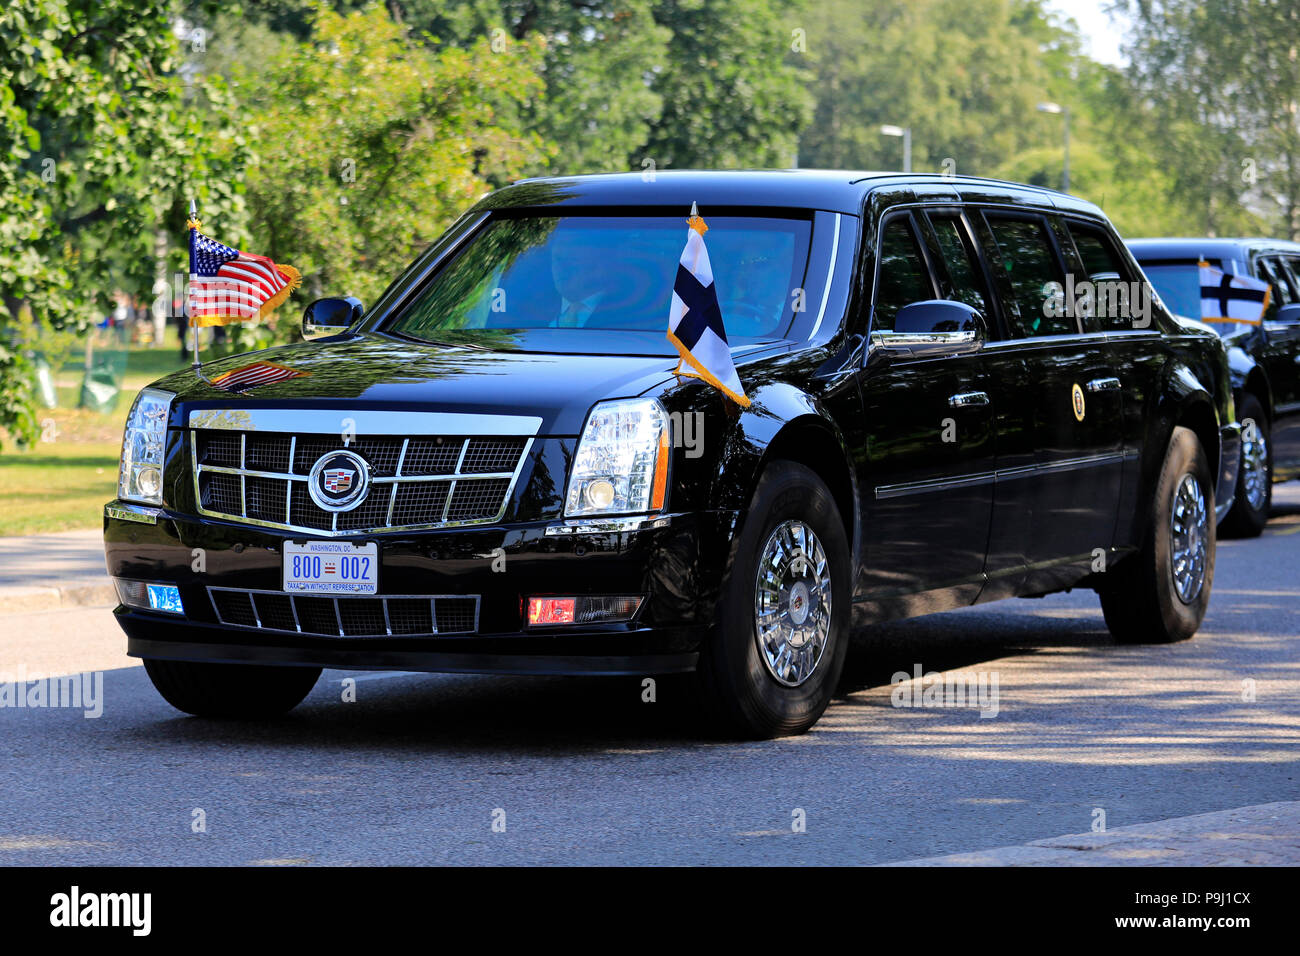 Presidential Car High Resolution Stock Photography and Images - Alamy